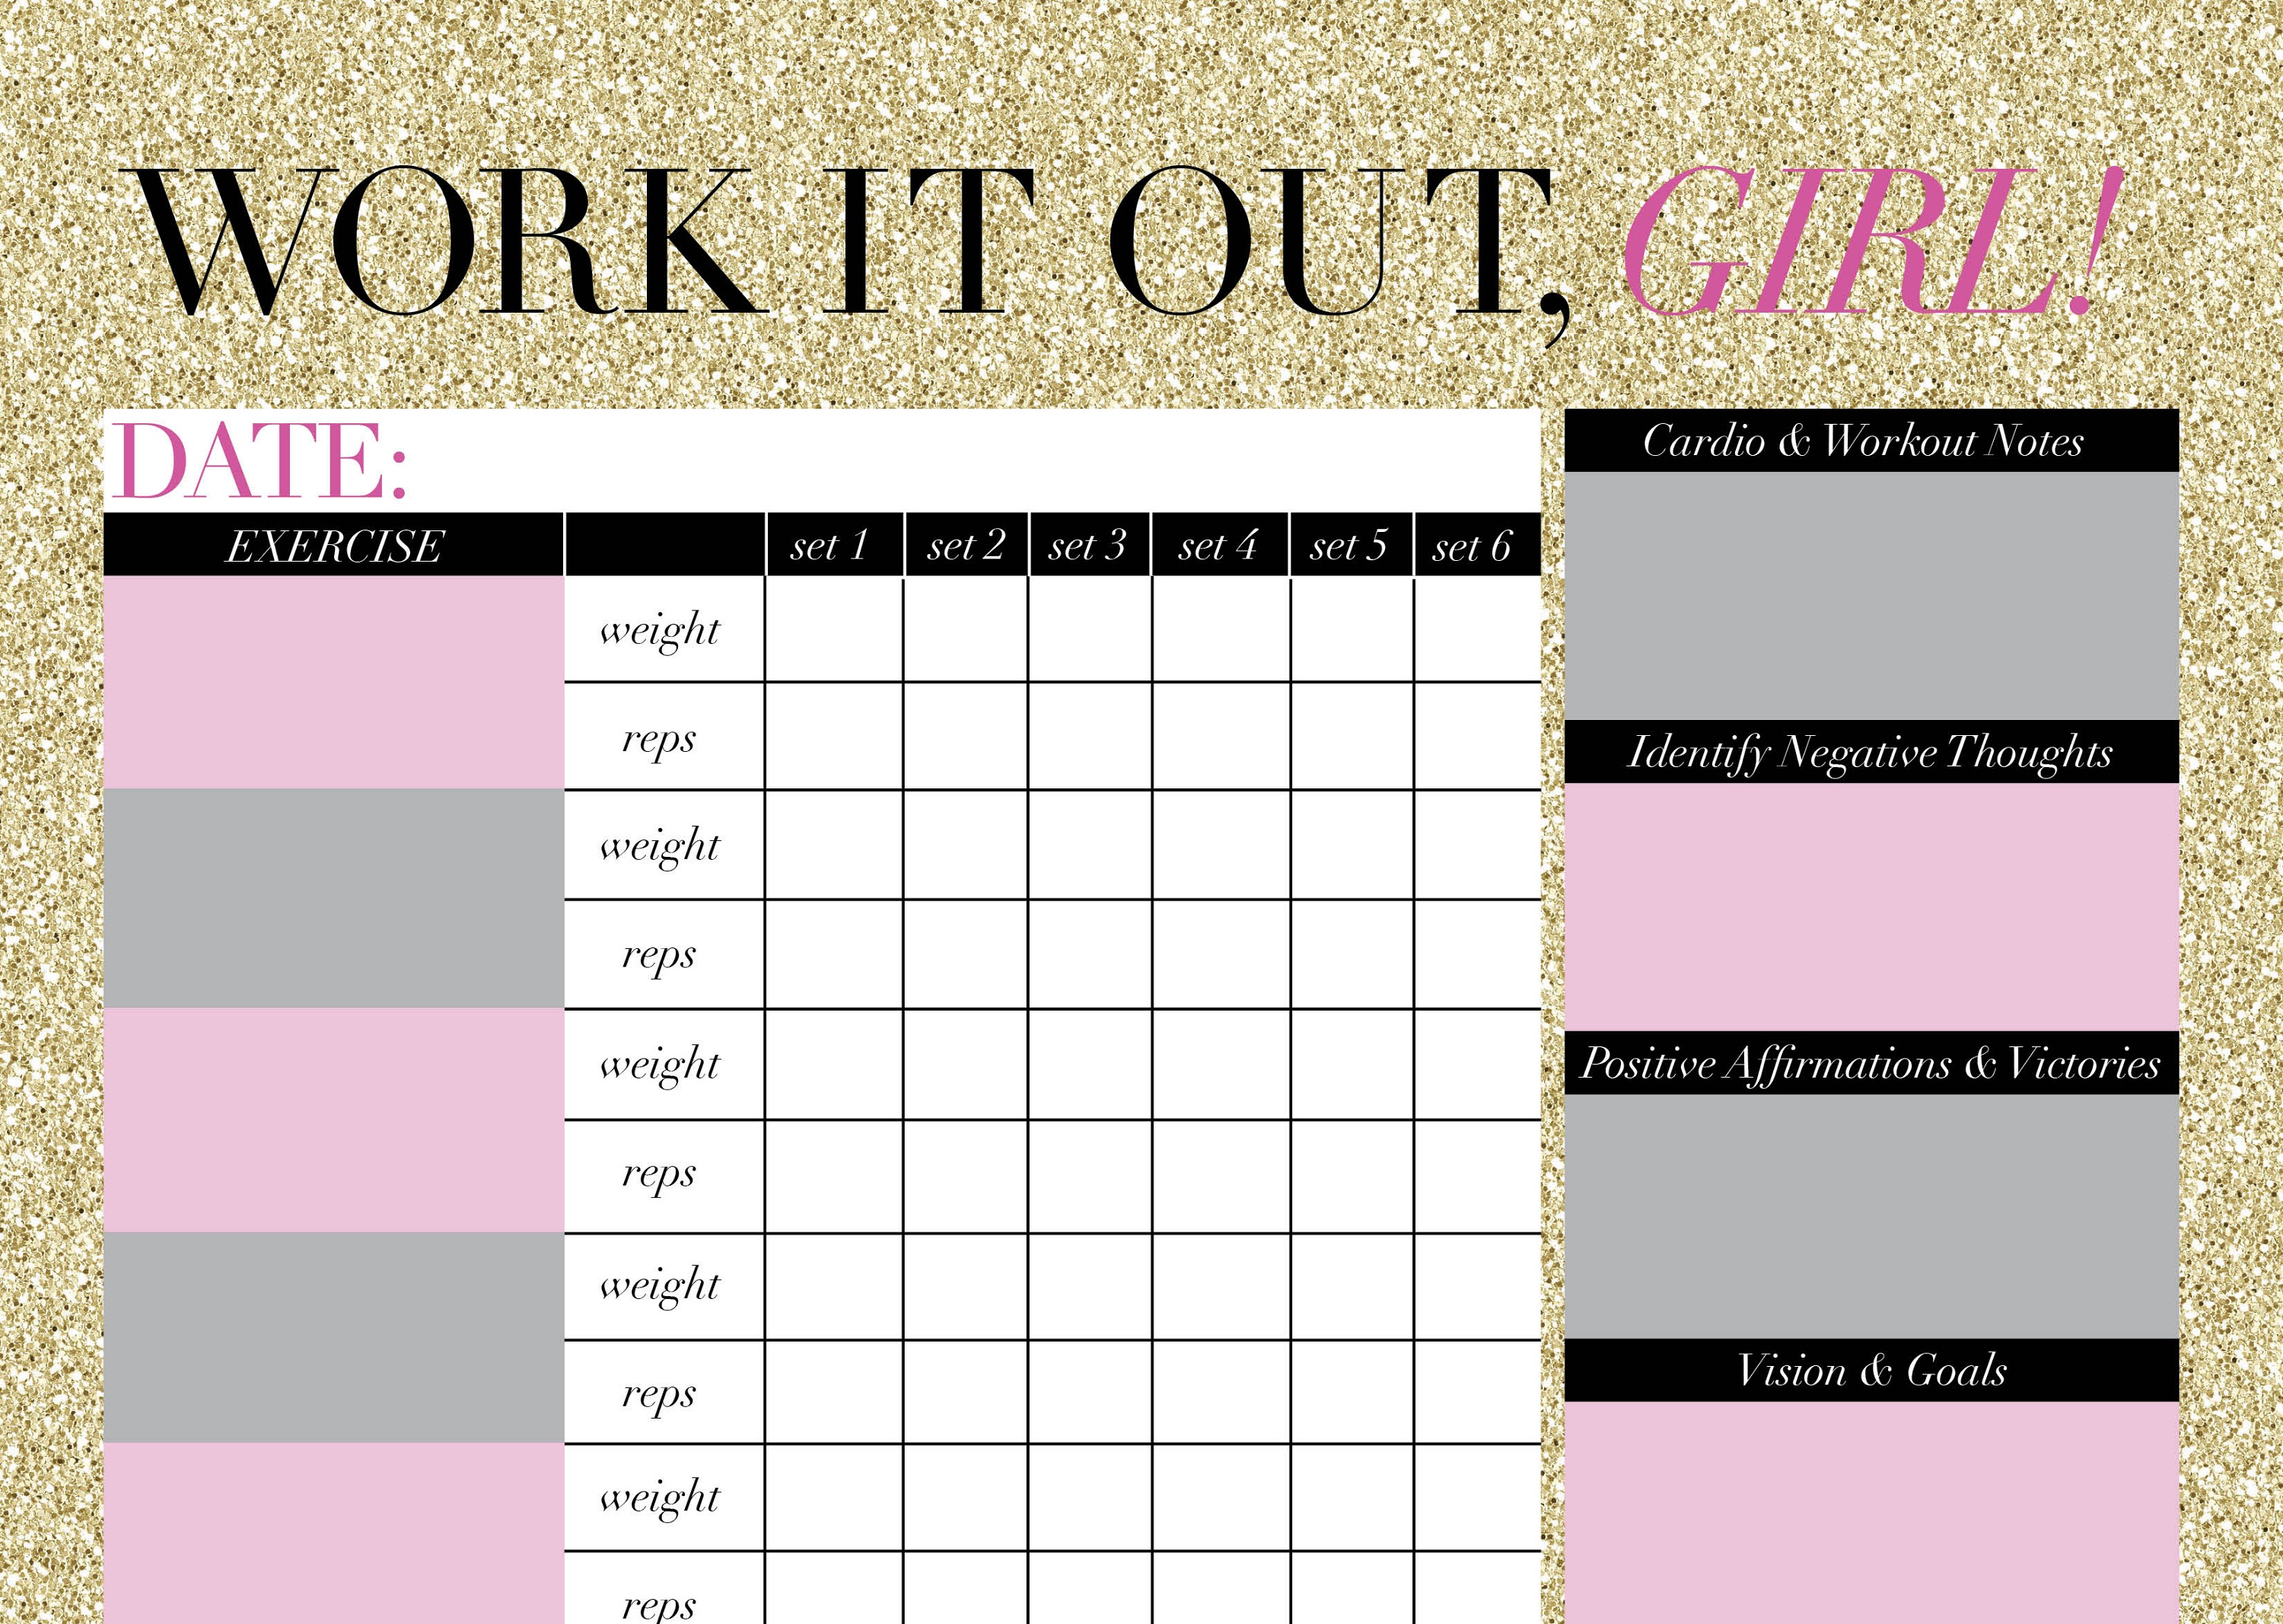 15 Minute The work workout calendar for Push Pull Legs